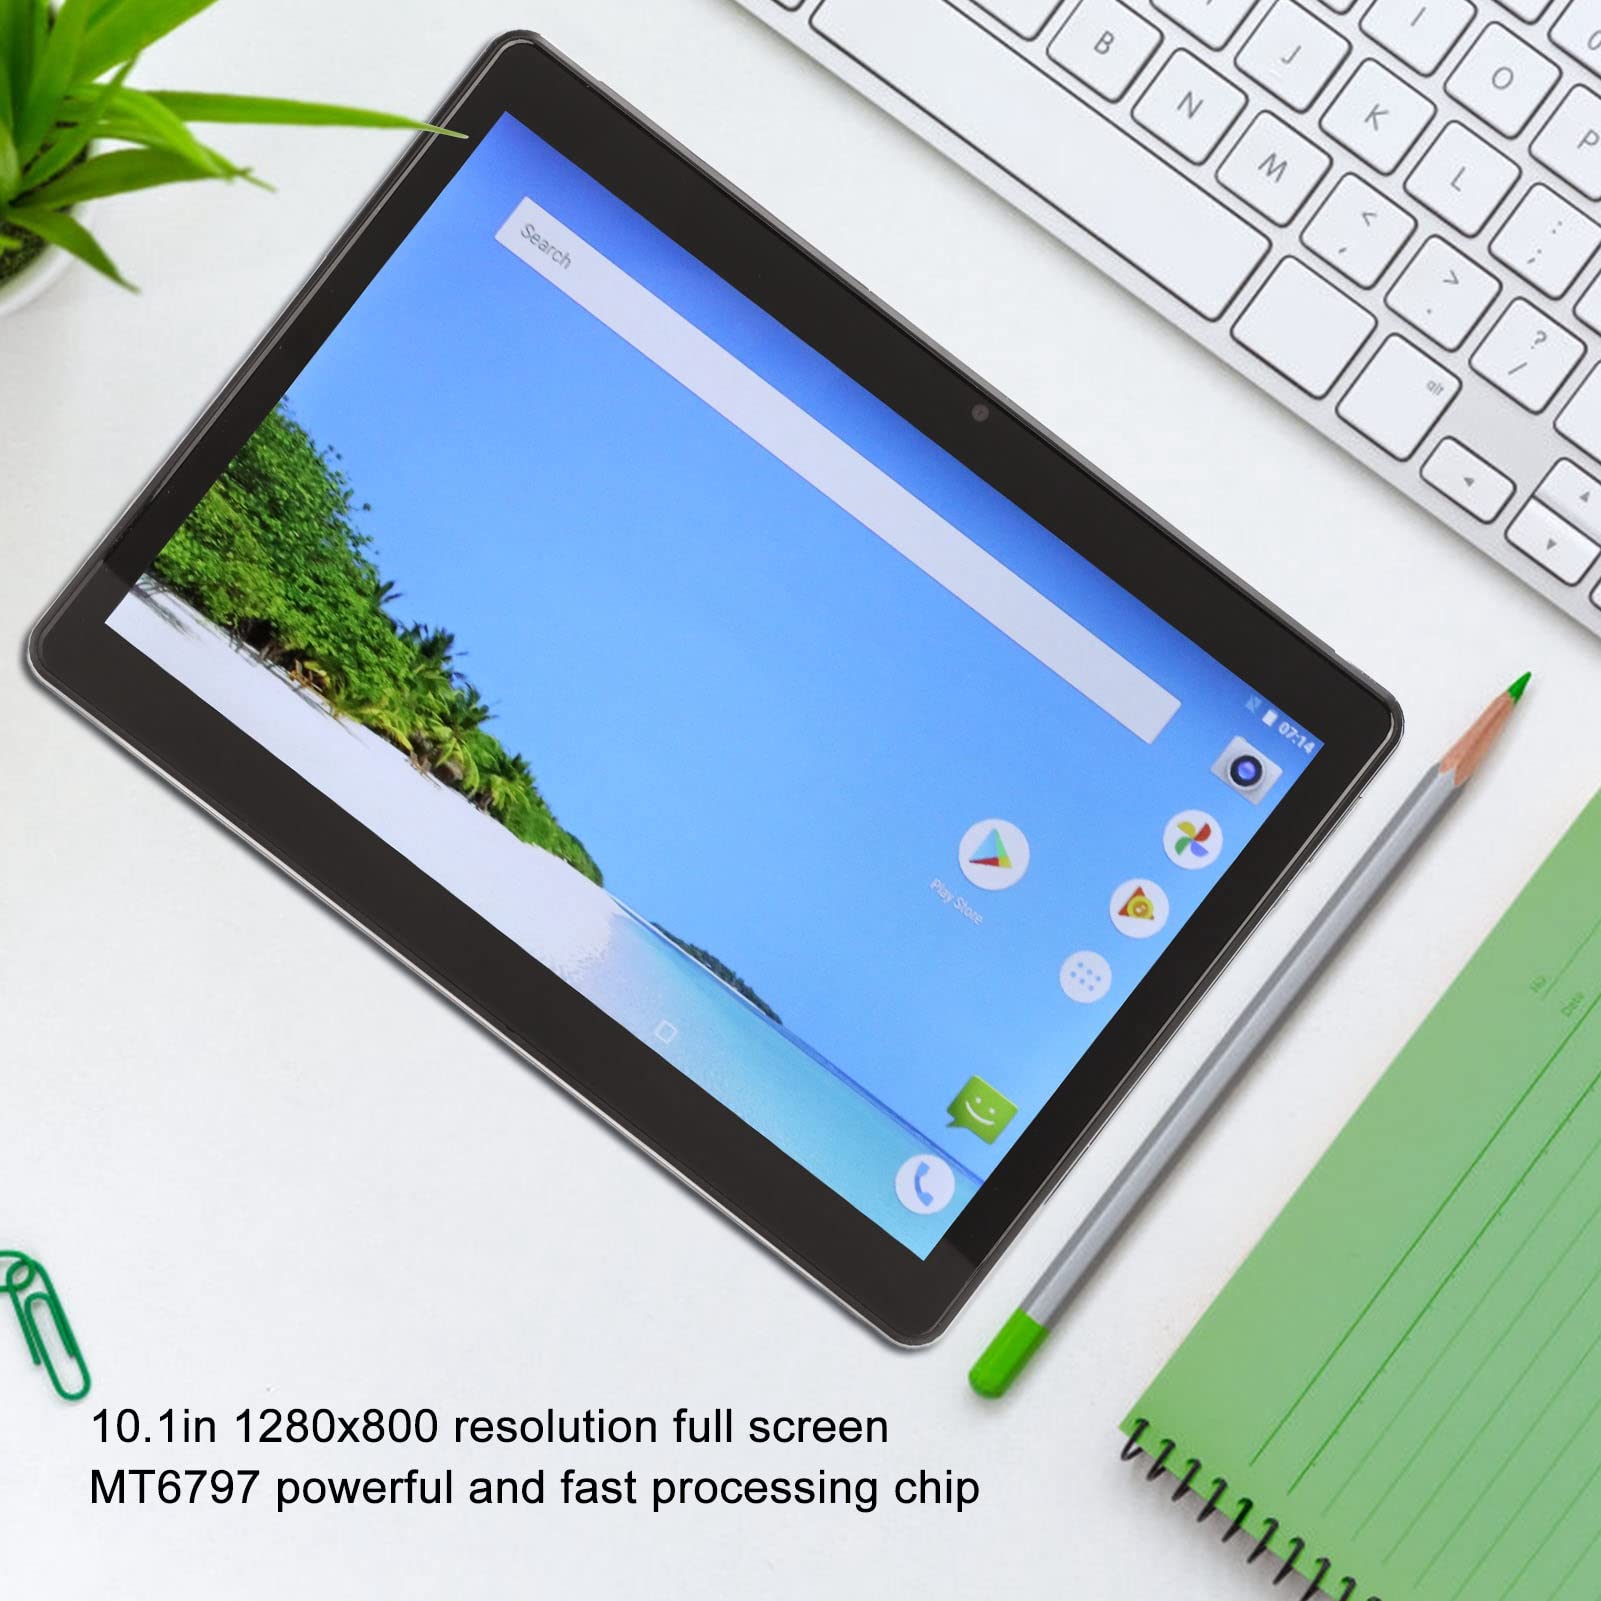 Tablet PC,10.1in Tablet,HD Screen Tablet, 3GB 32GB for Android8 Tablet, 4G Dual SIM Dual Standby Tablet,Calling Tablet PC